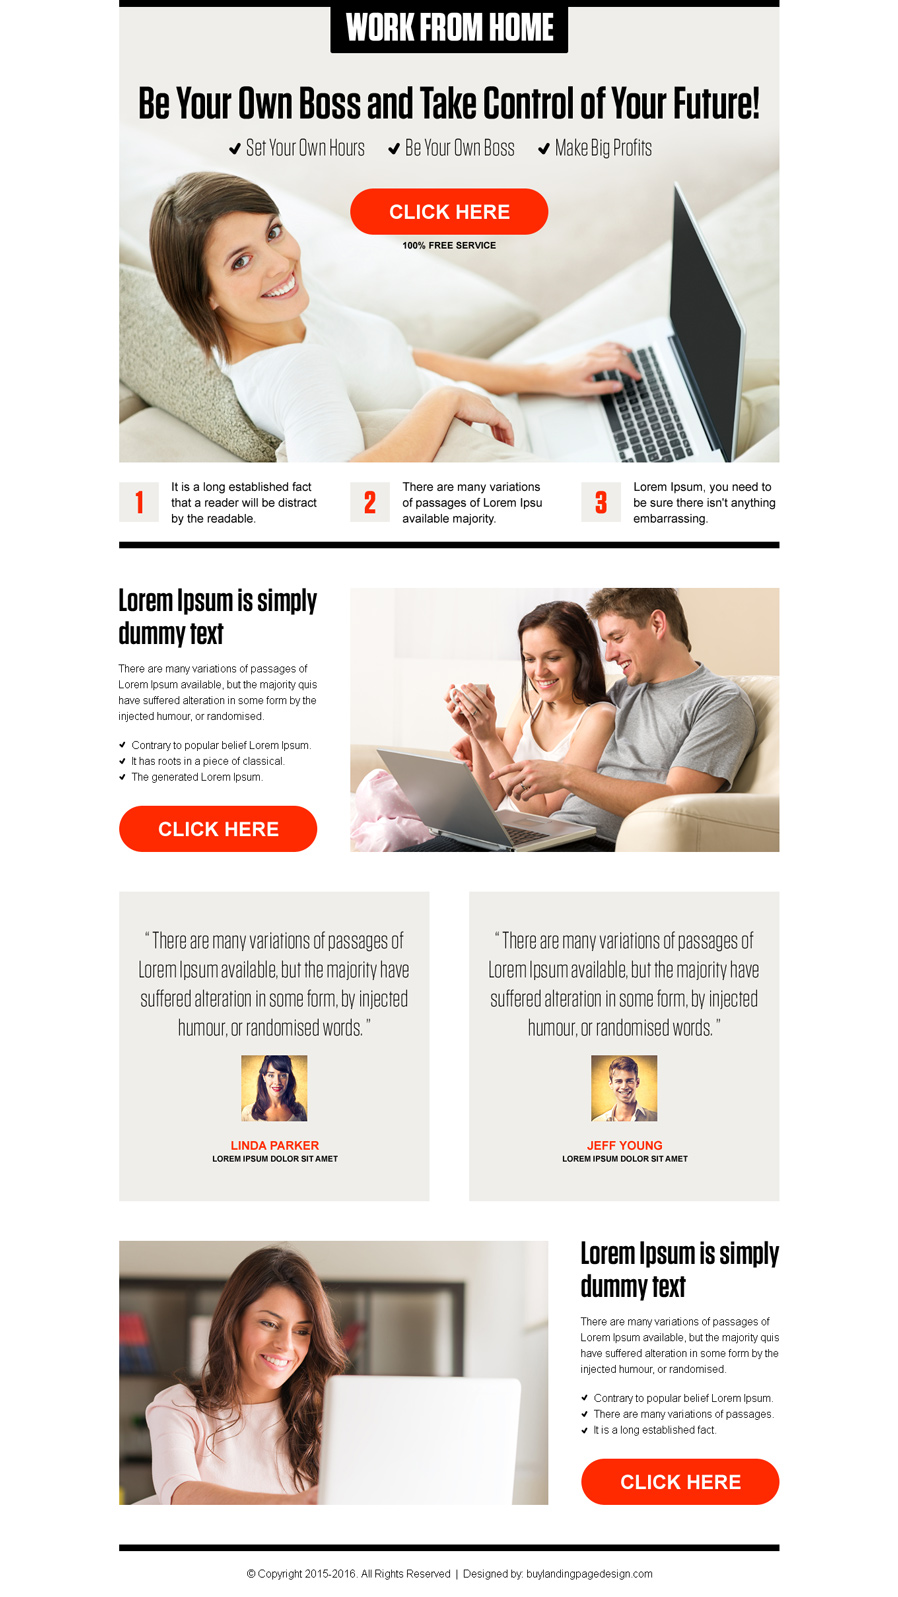 work-from-home-ppc-landing-page-design-that-converts-013